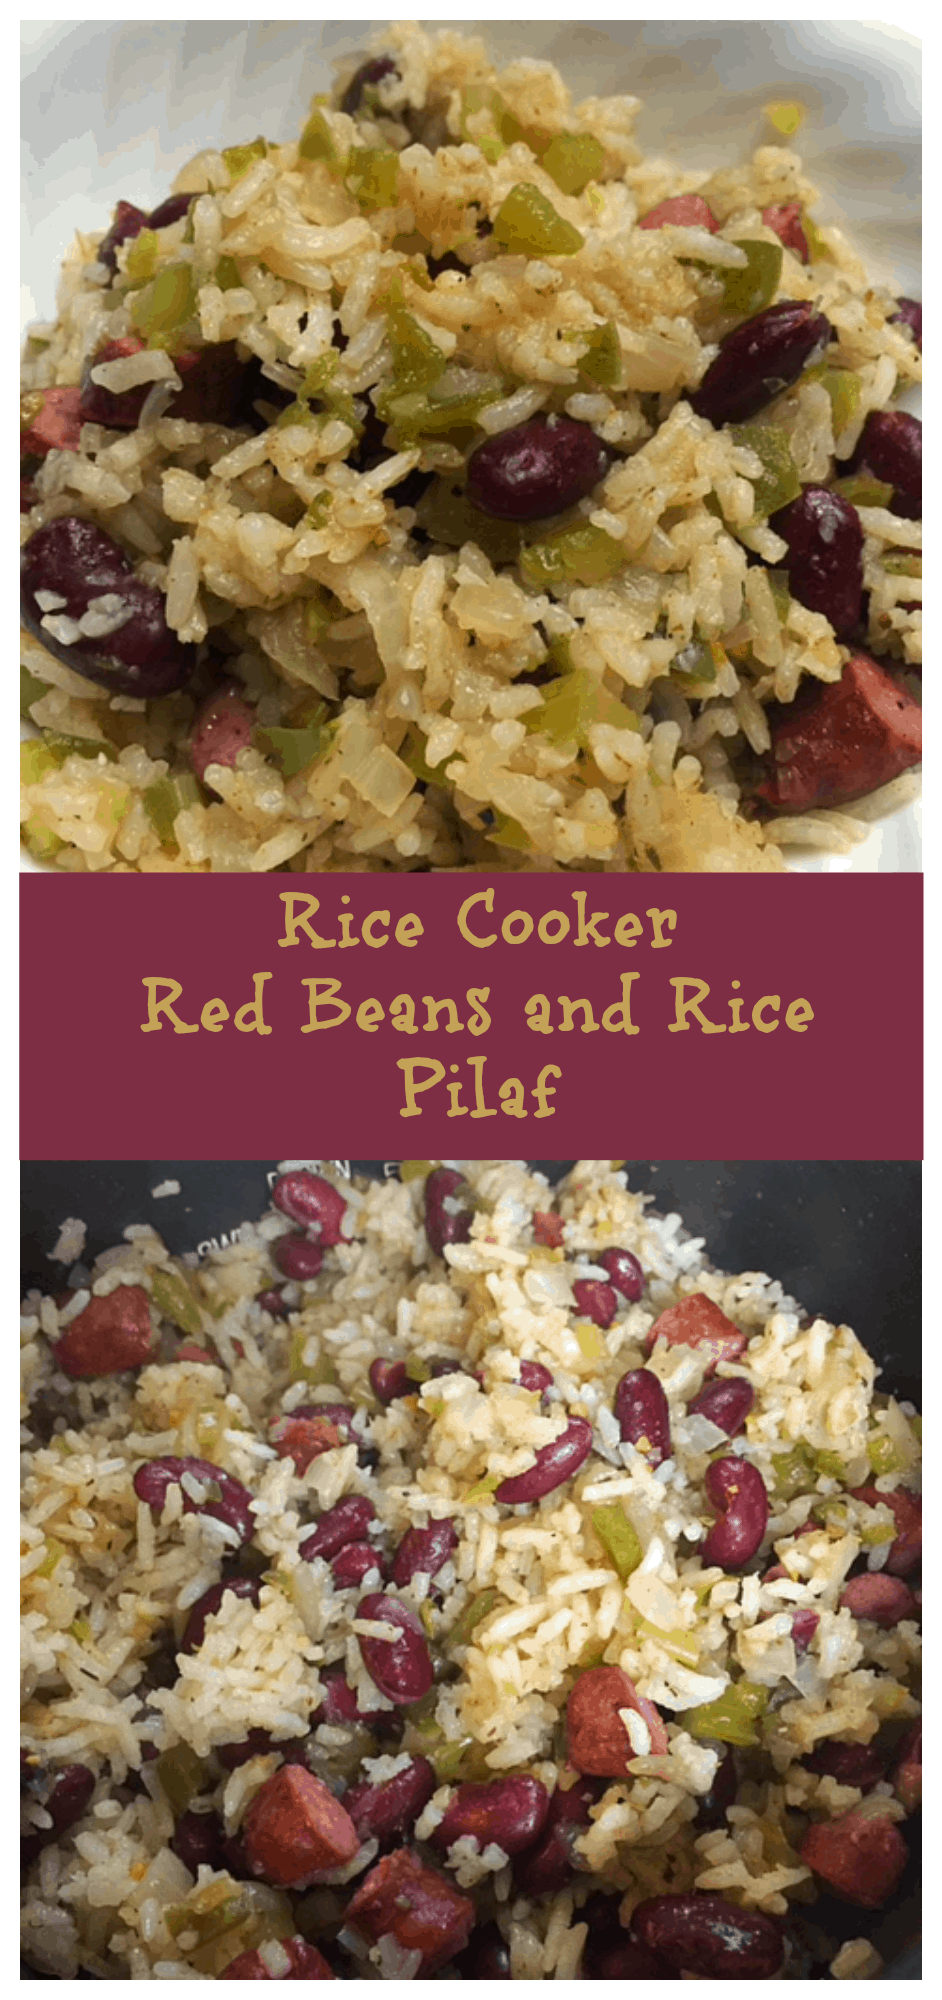 Rice Cooker Cajun Red Beans and Rice Pilaf